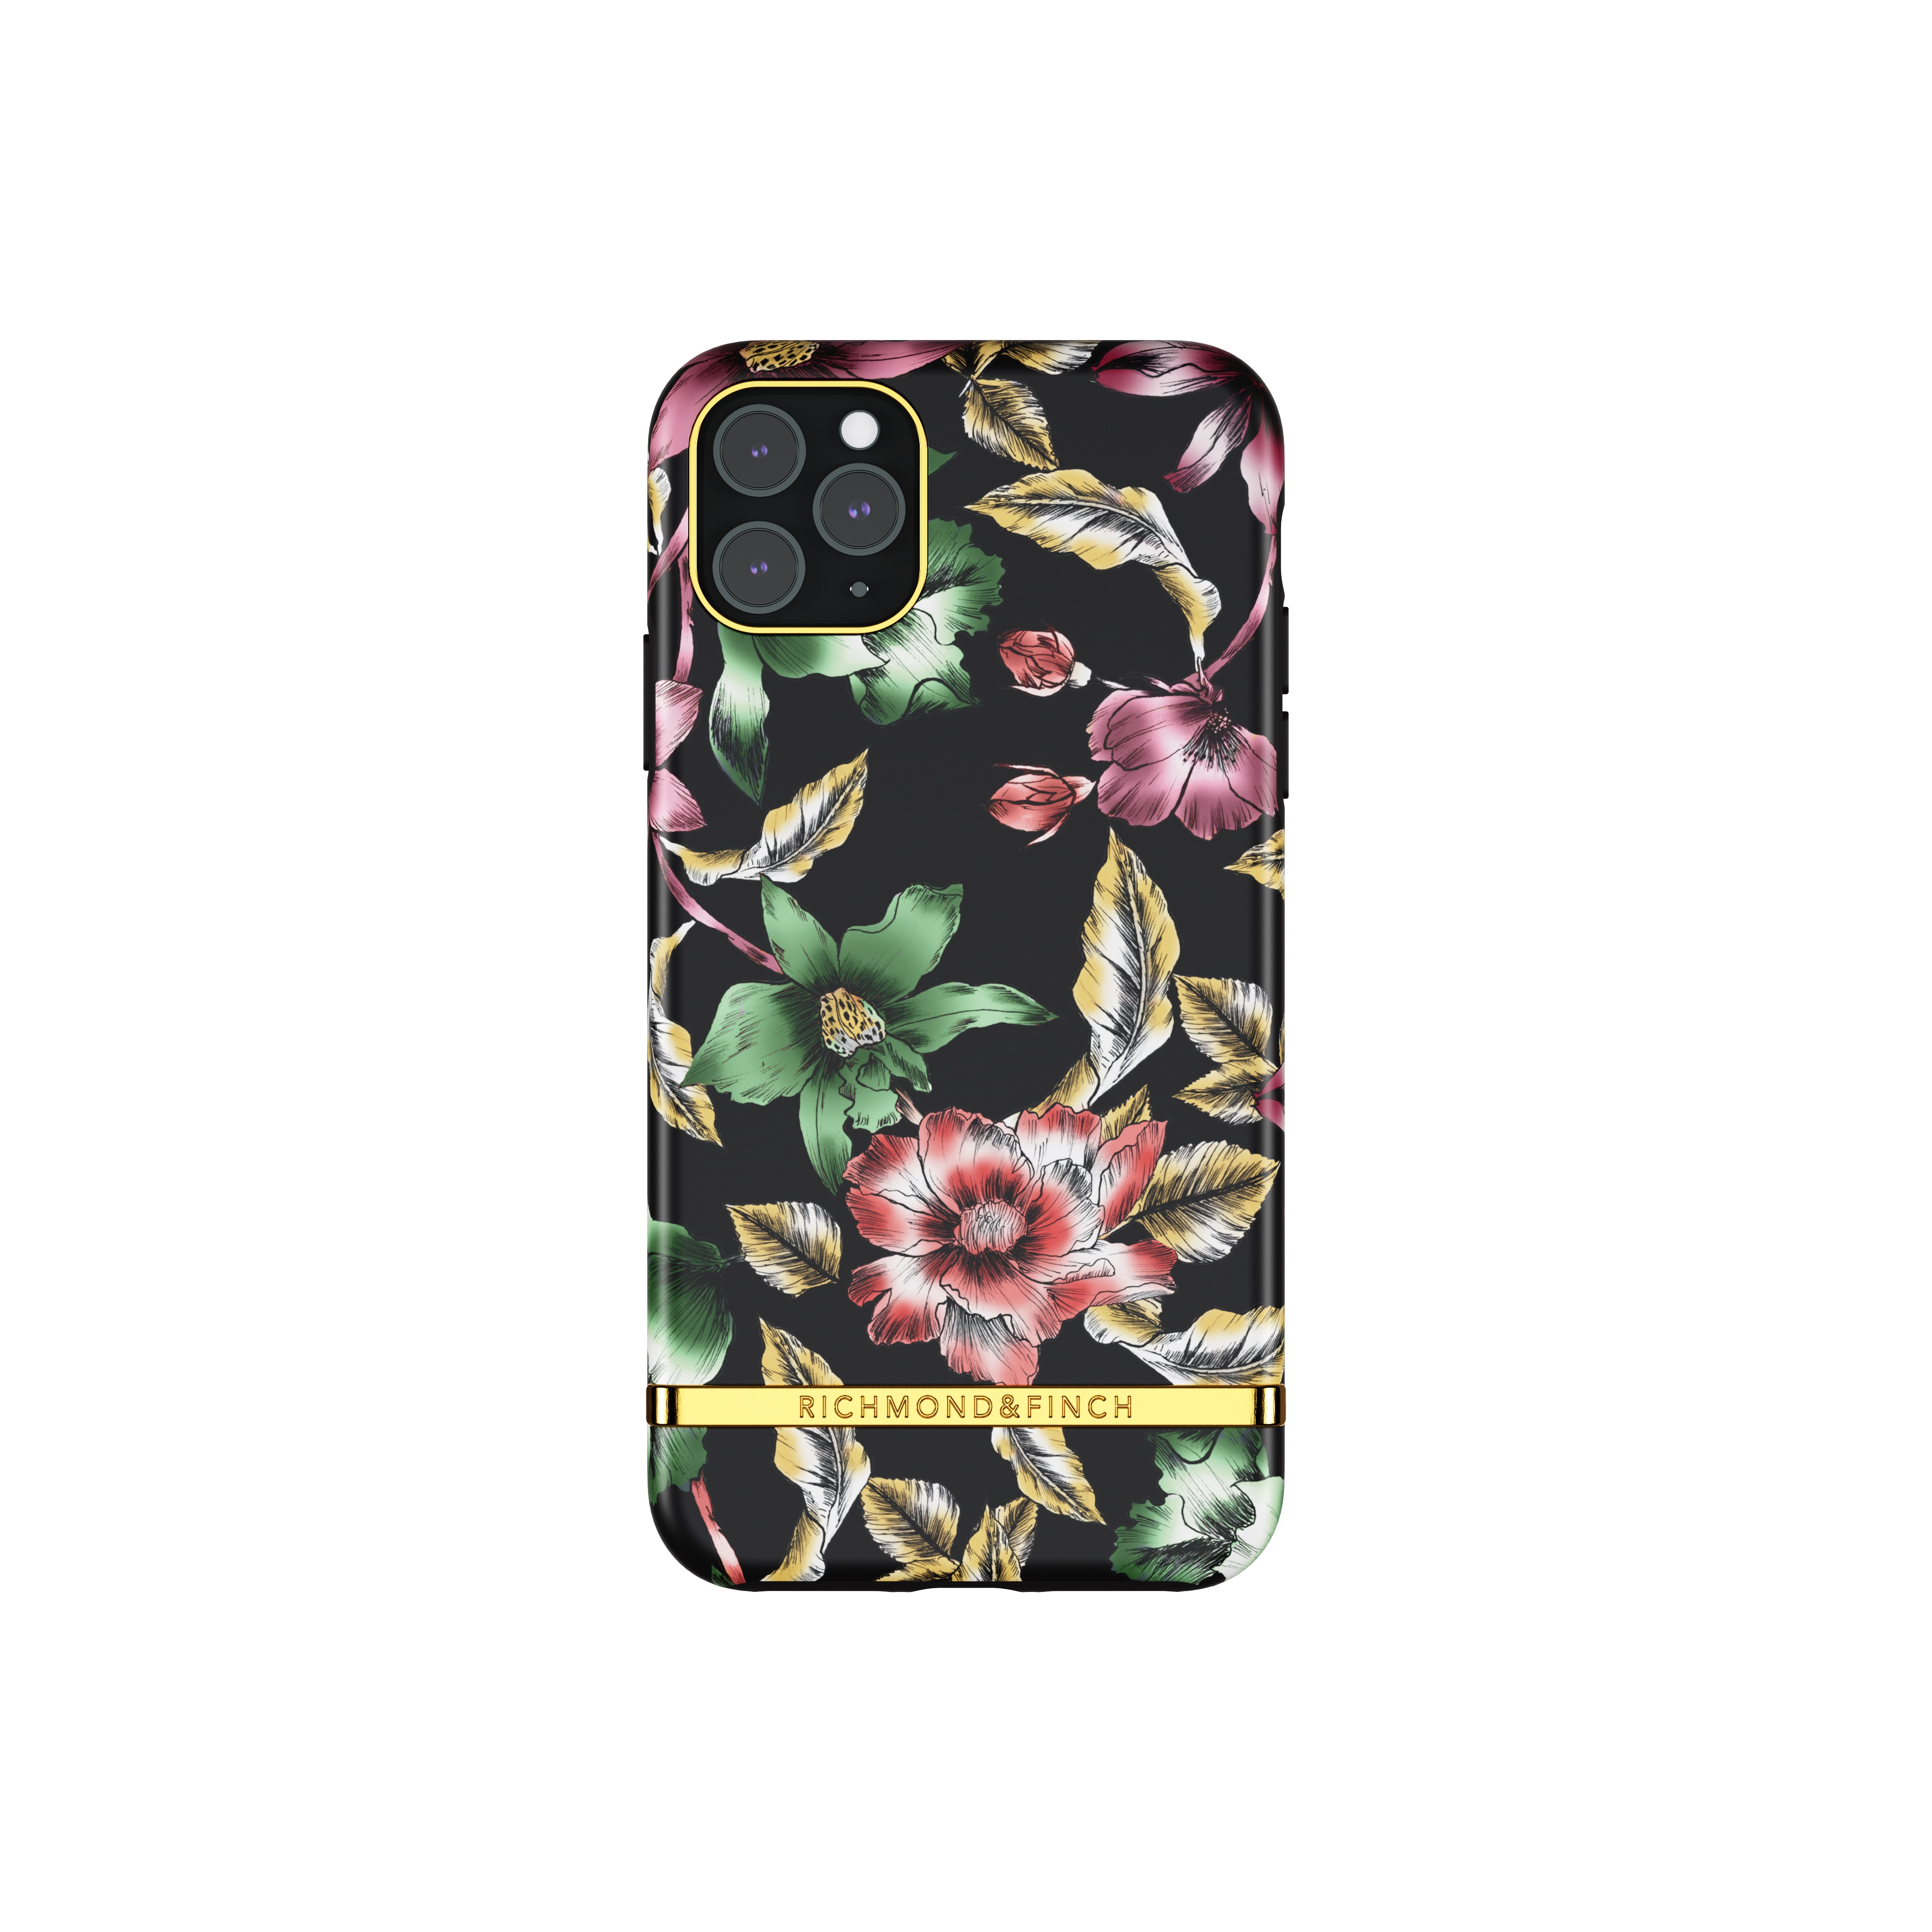 11 iPhone Backcover, Flower Pro 11 MAX, APPLE, Show COLOURFUL & IPHONE FINCH RICHMOND PRO Max,